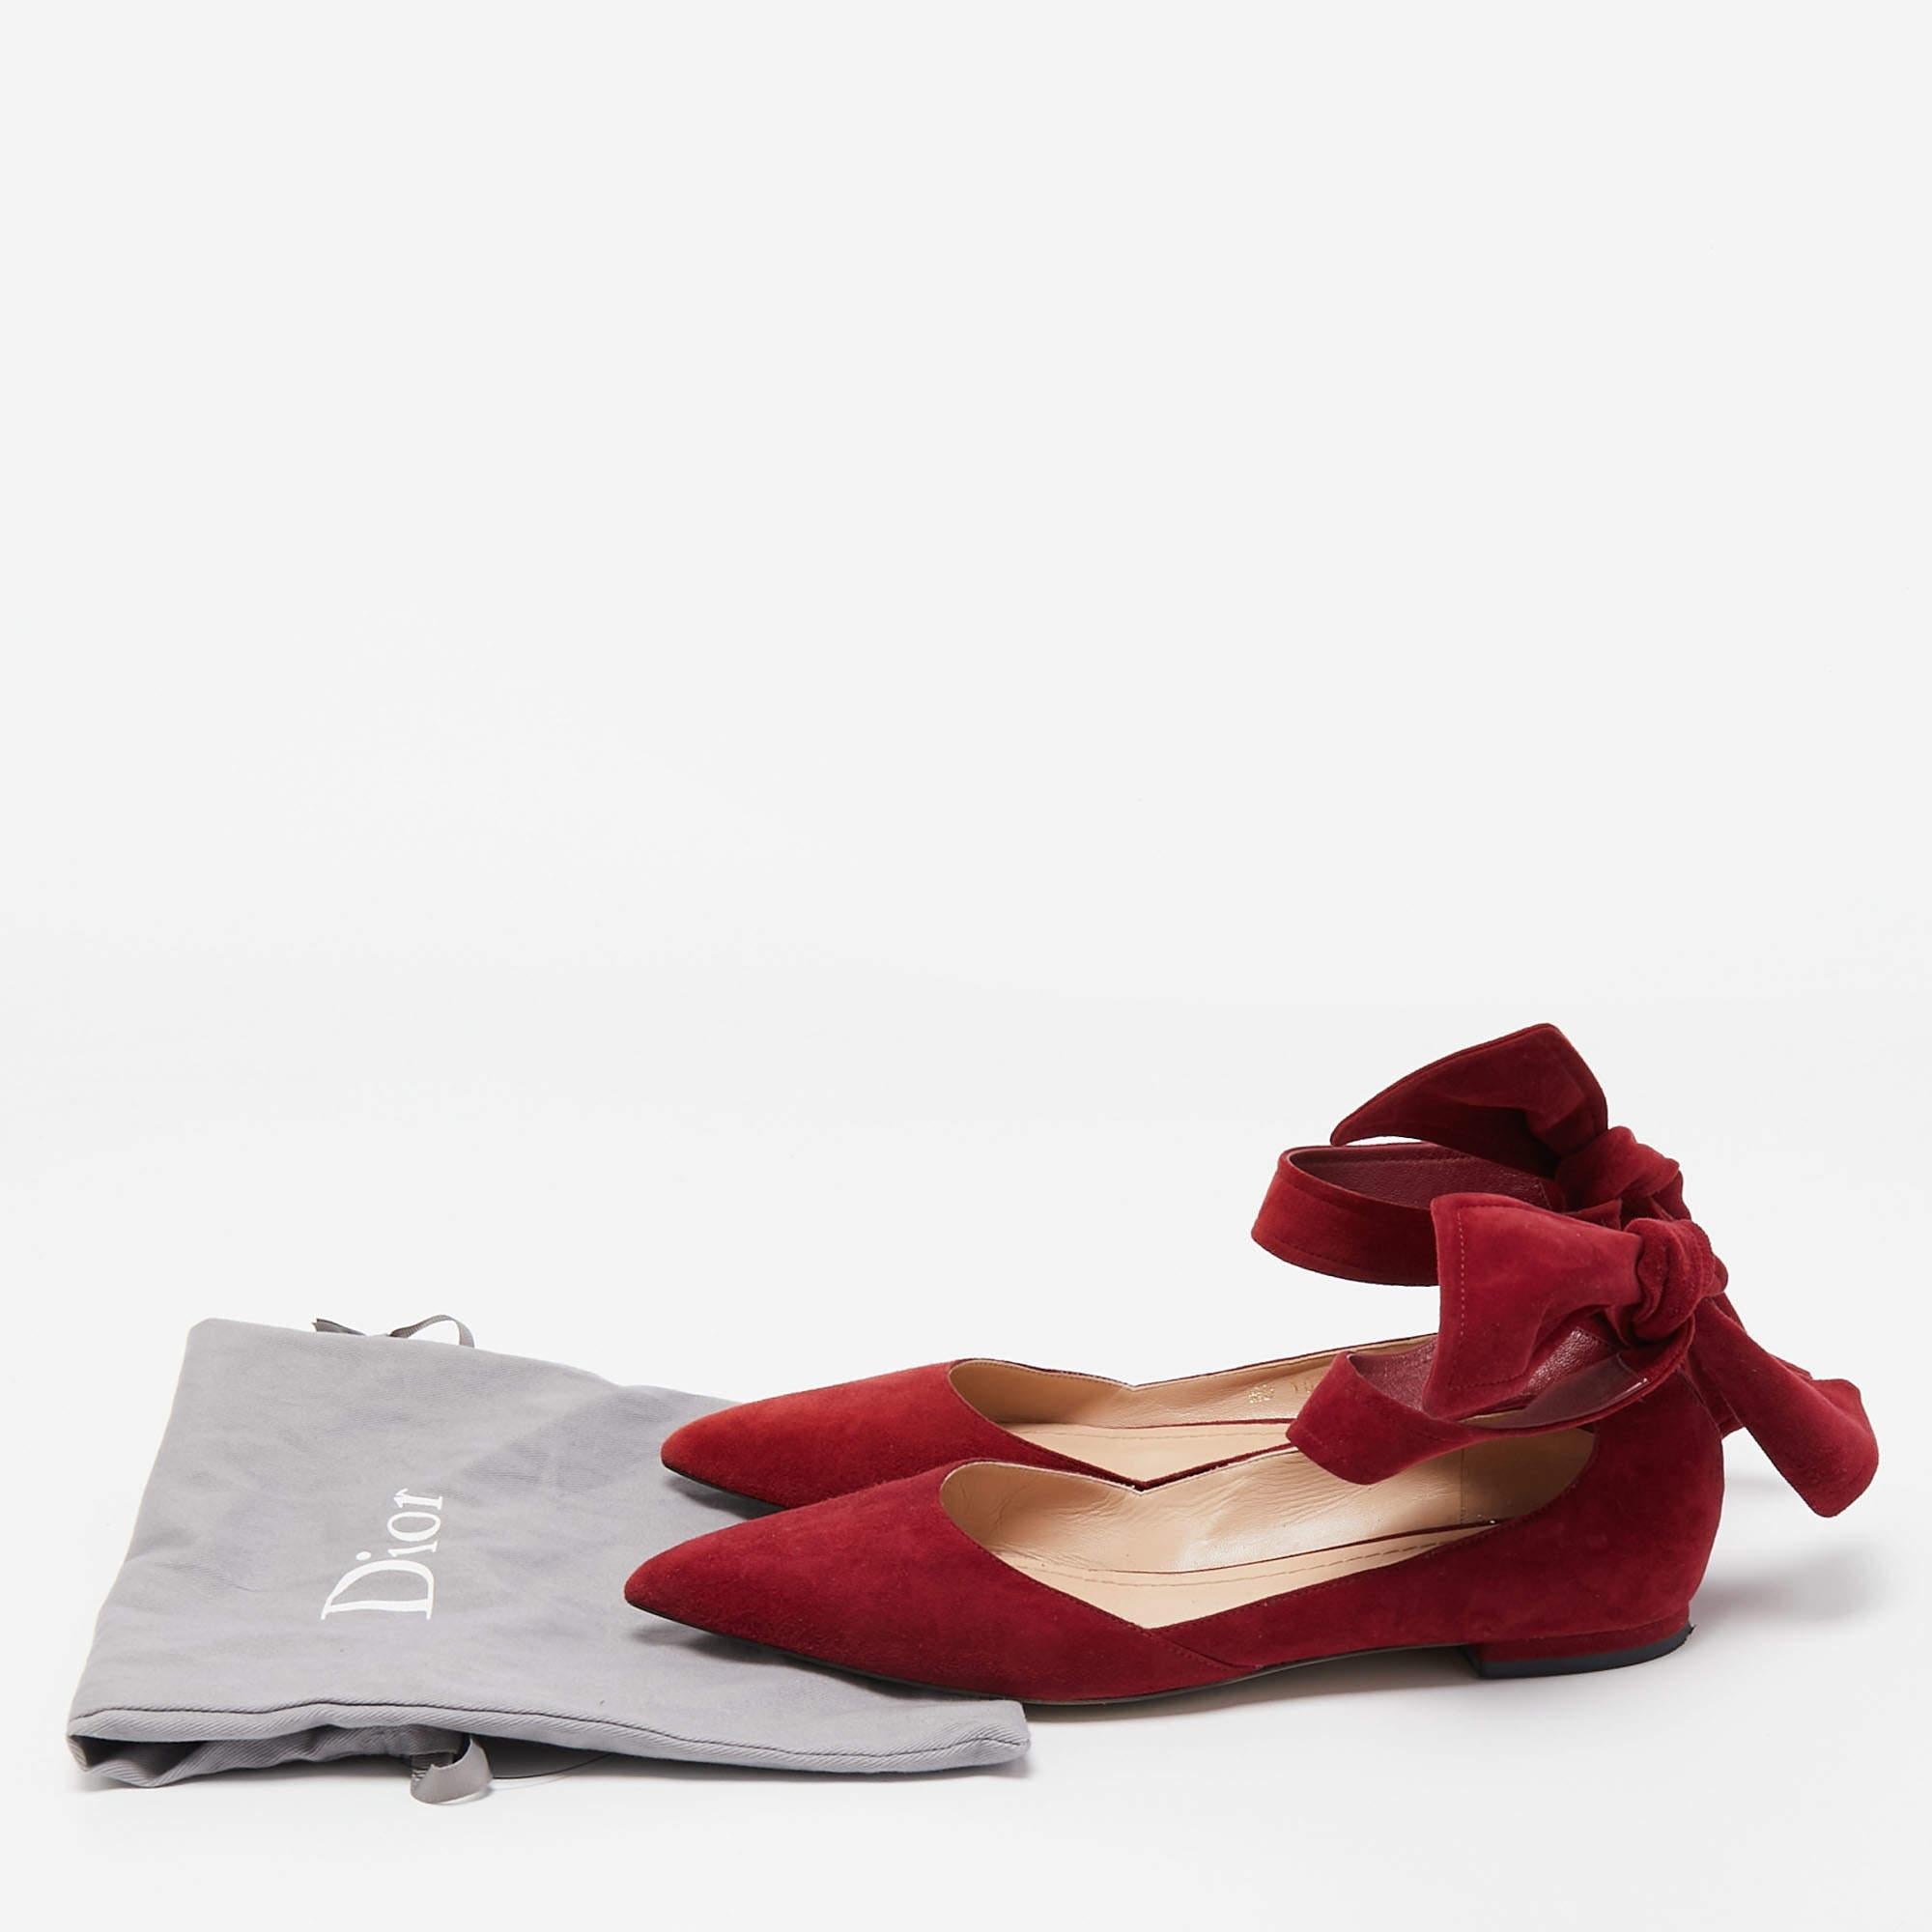 Dior Red Suede Ankle Wrap Ballet Flats Size 38 5